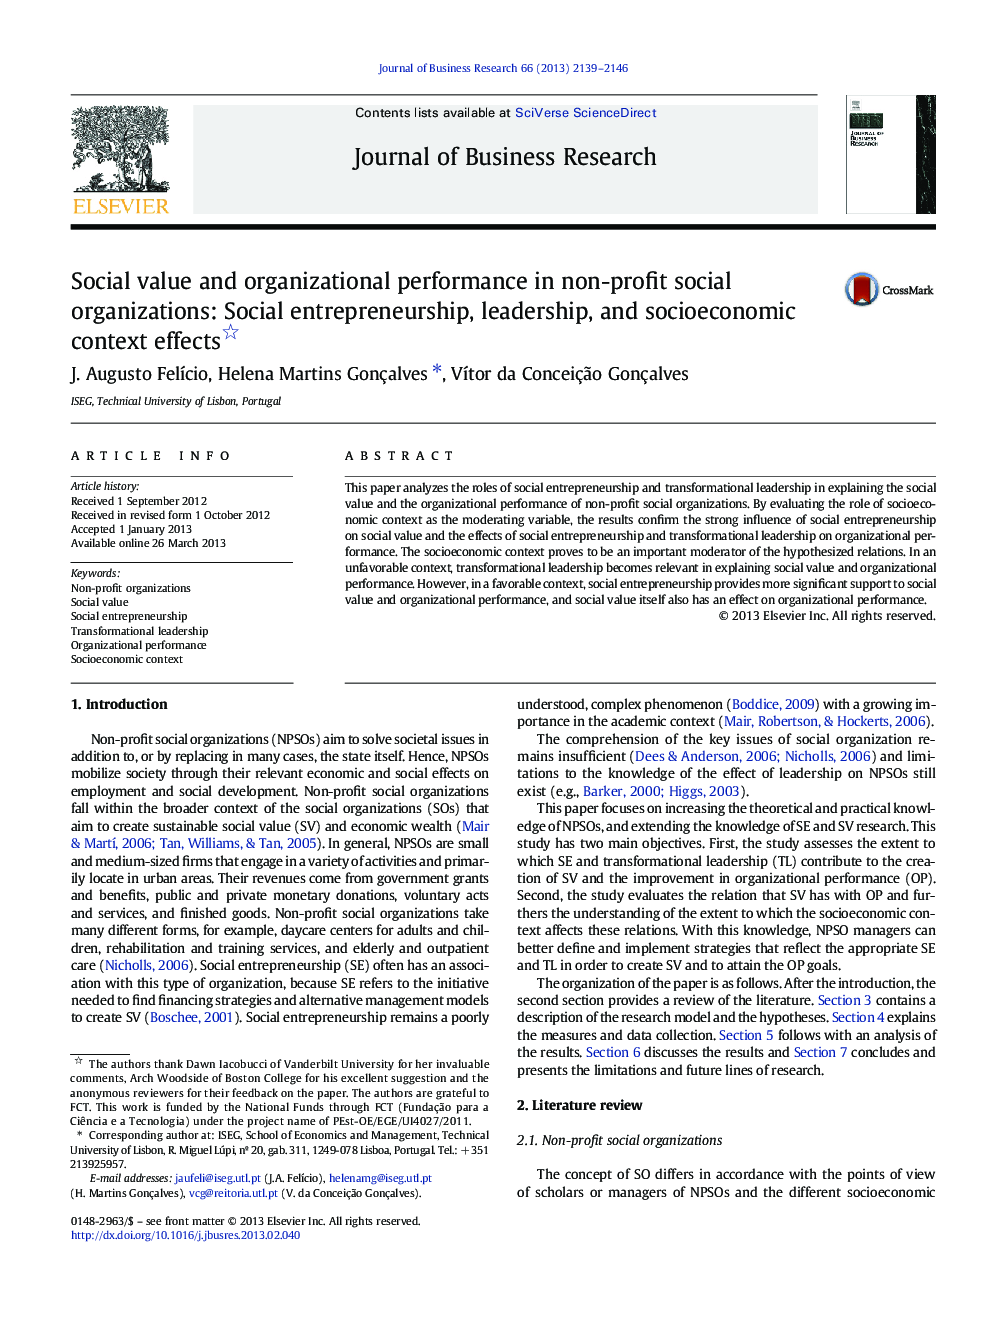 Social value and organizational performance in non-profit social organizations: Social entrepreneurship, leadership, and socioeconomic context effects 